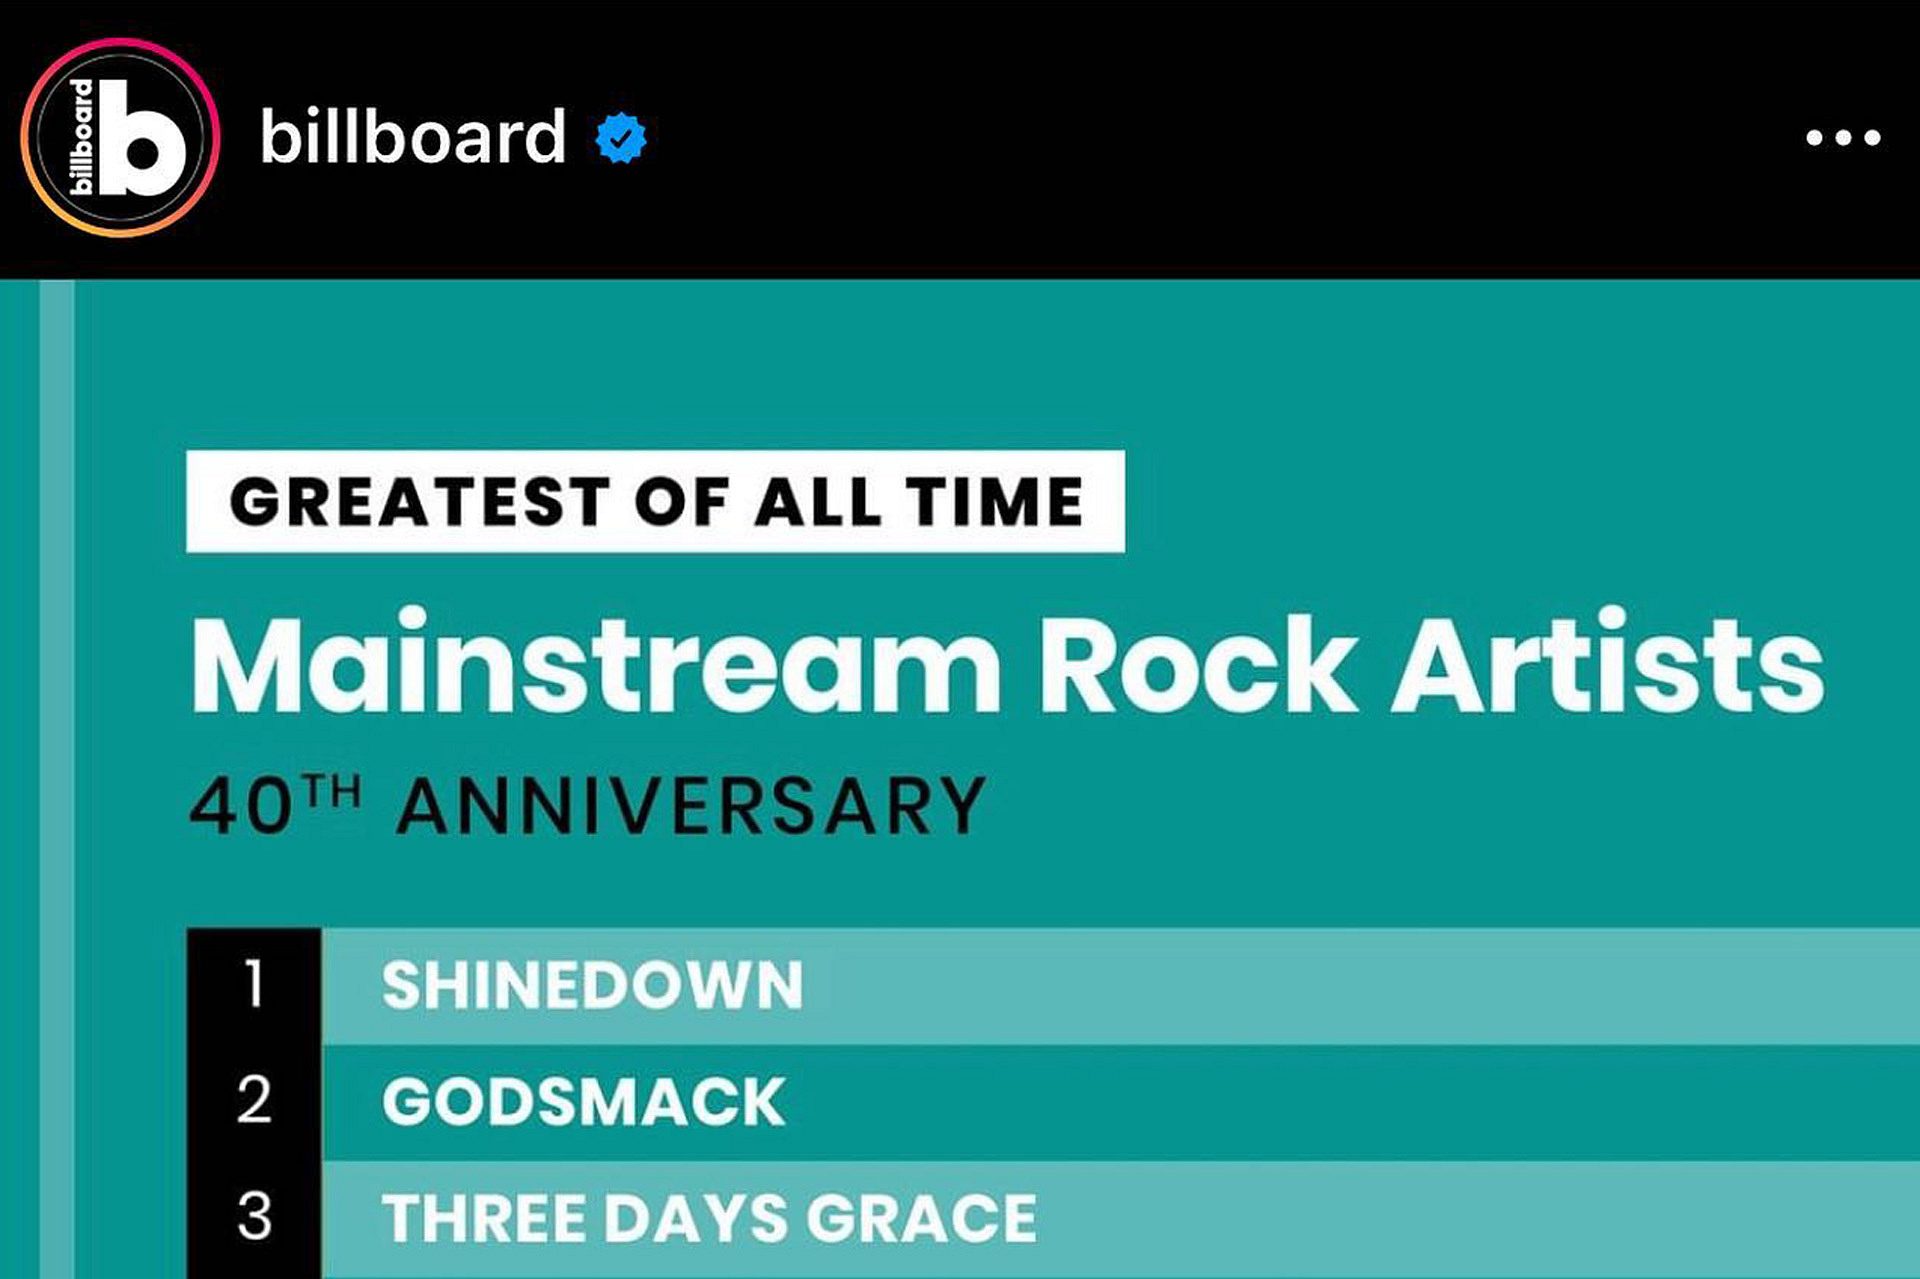 Shinedown named #1 on Billboard's Greatest of All Time Mainstream Rock Artist Chart